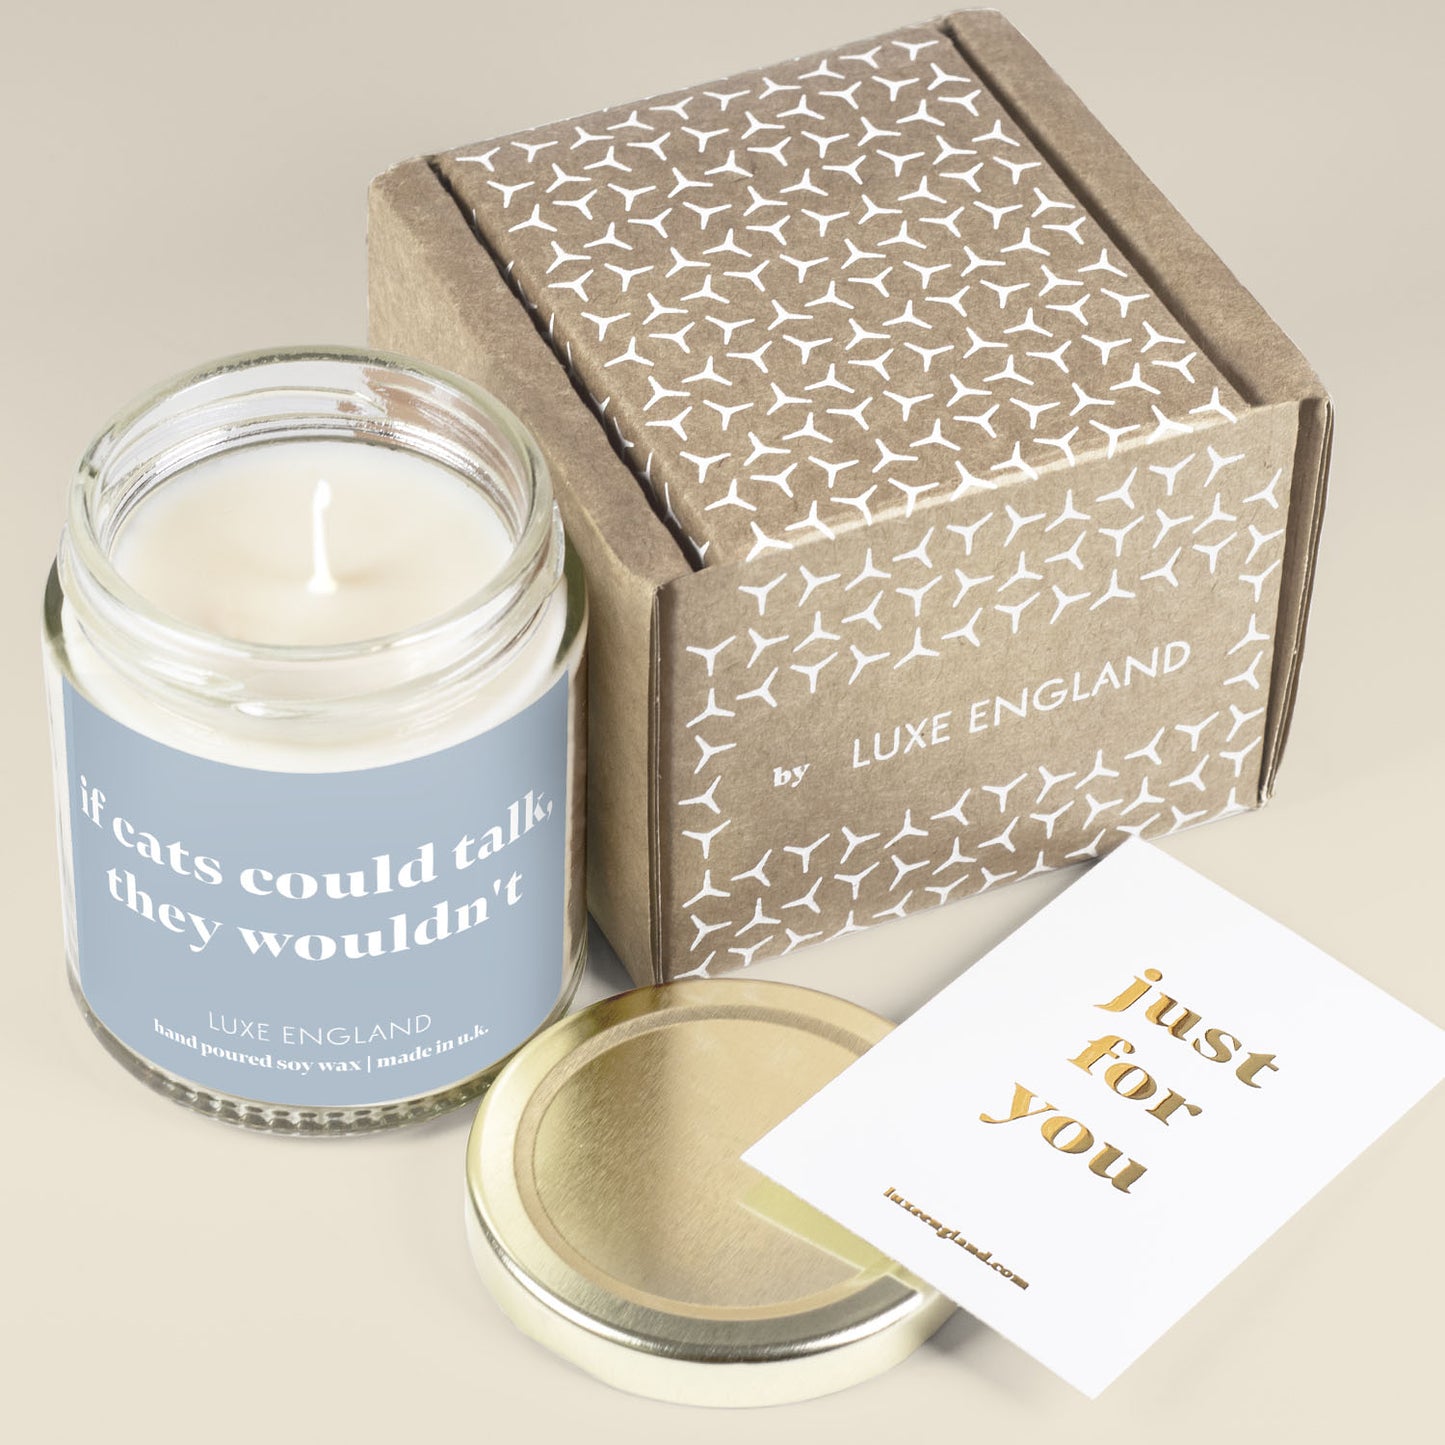 Message Candle (if cats could talk, they wouldn't)